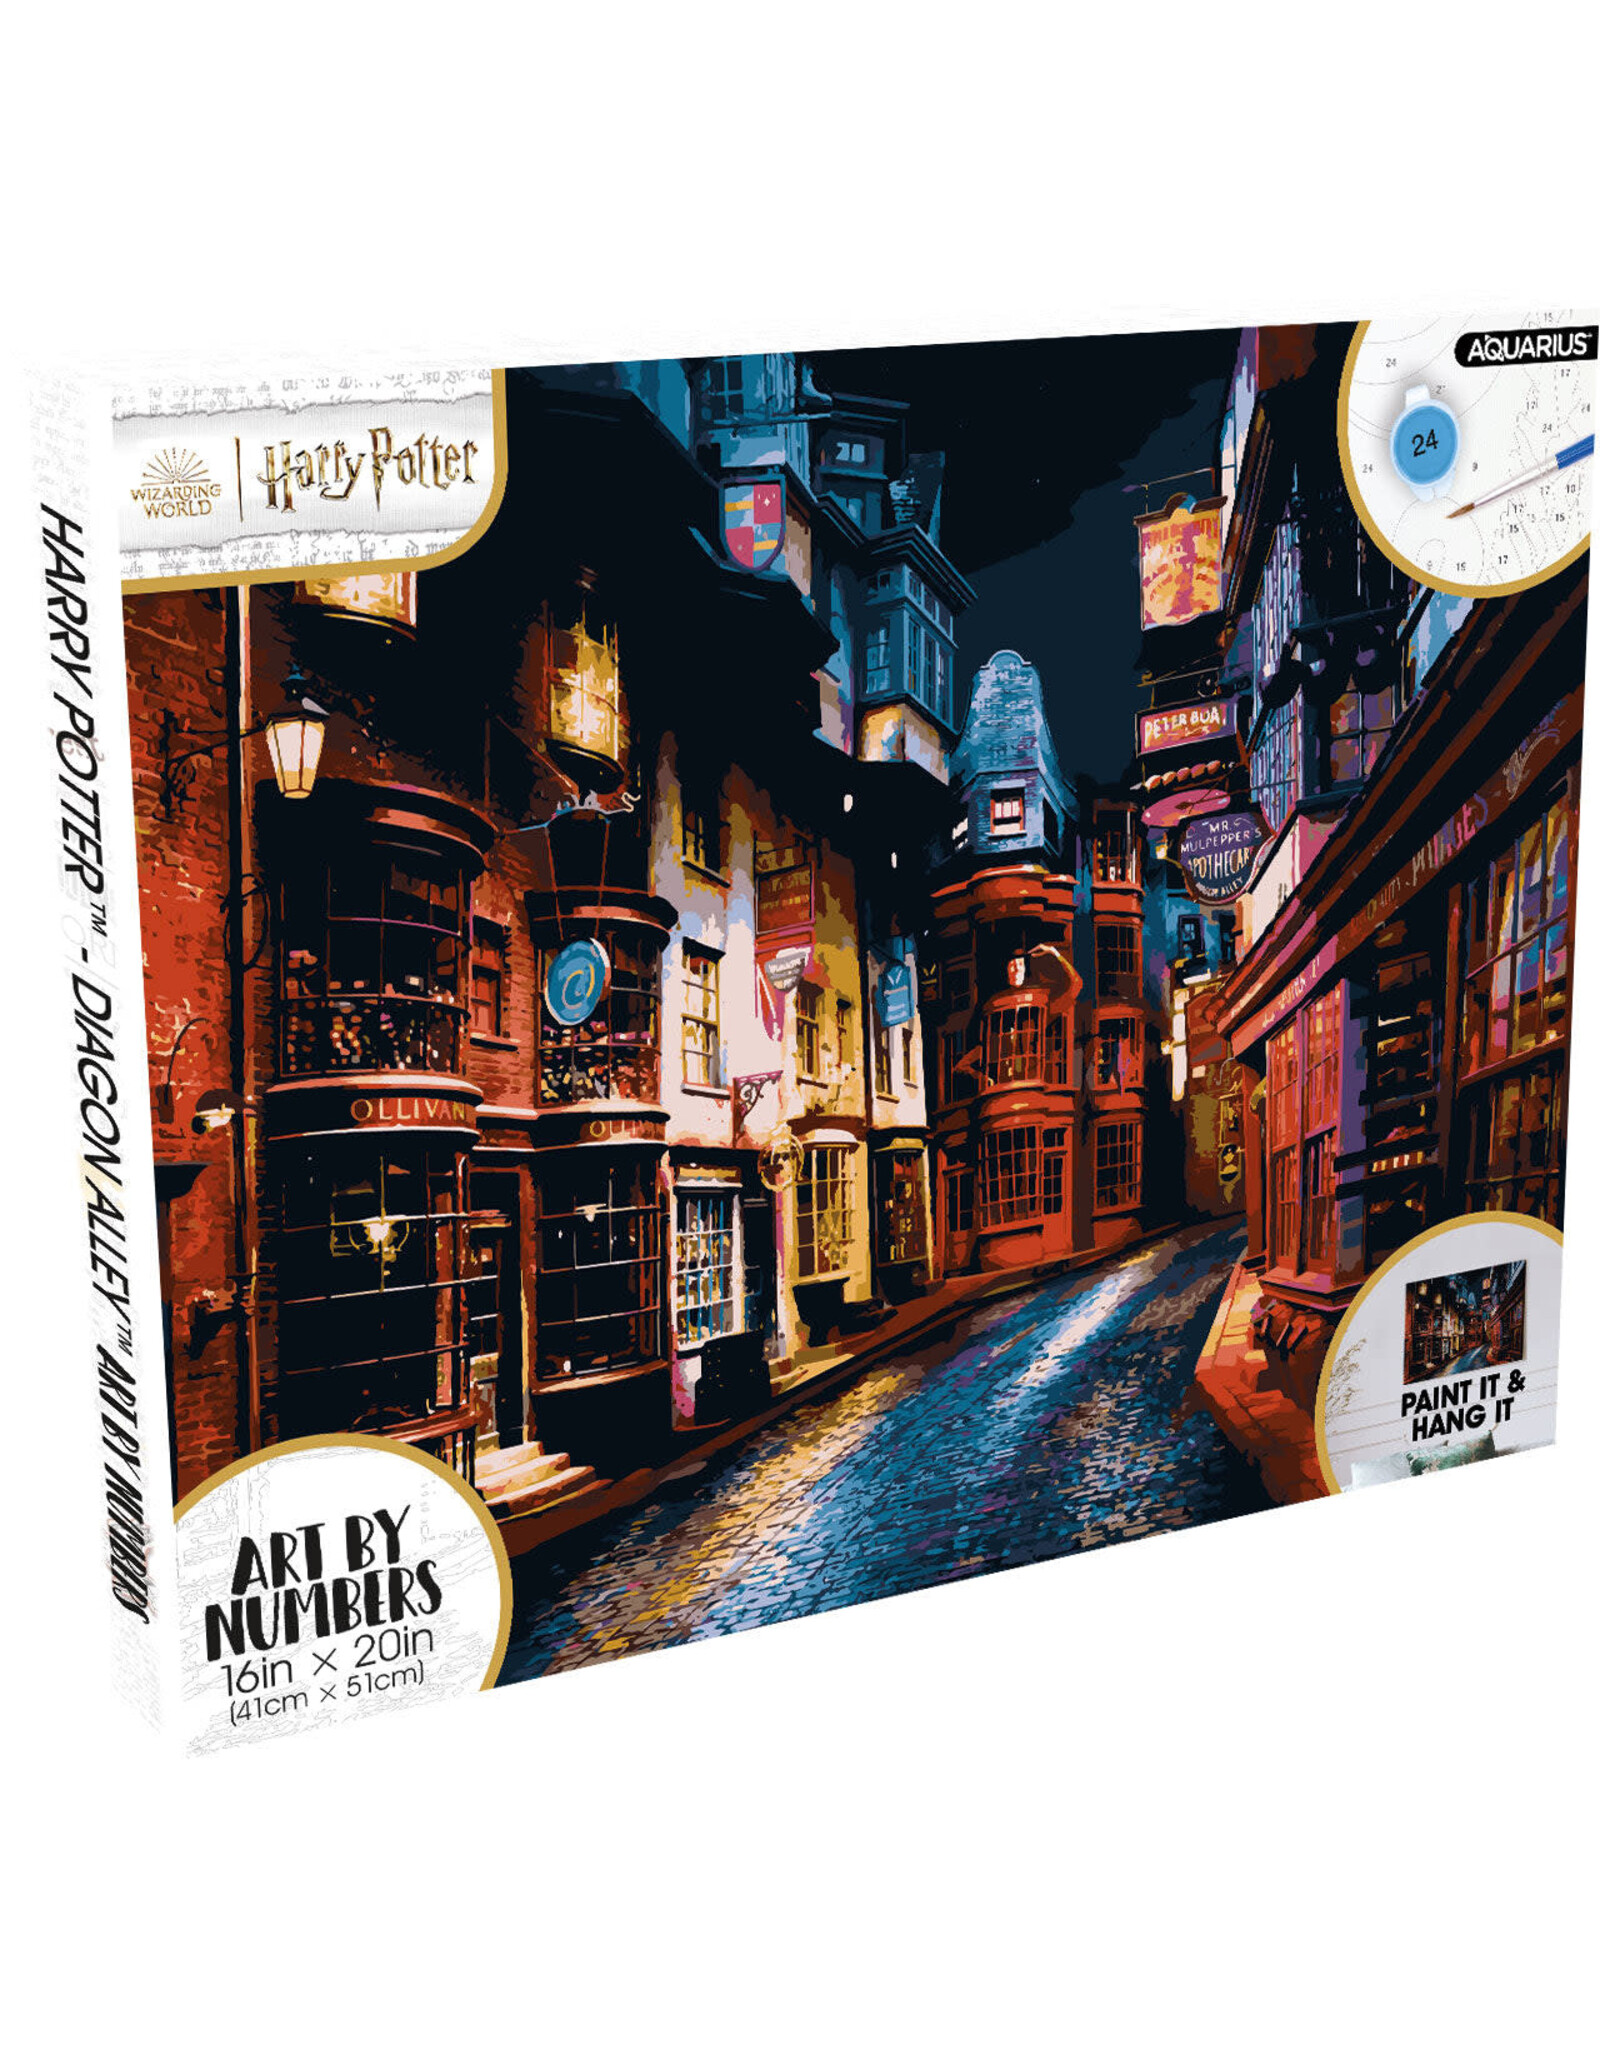 NMR Harry Potter Diagon Alley Art by Numbers